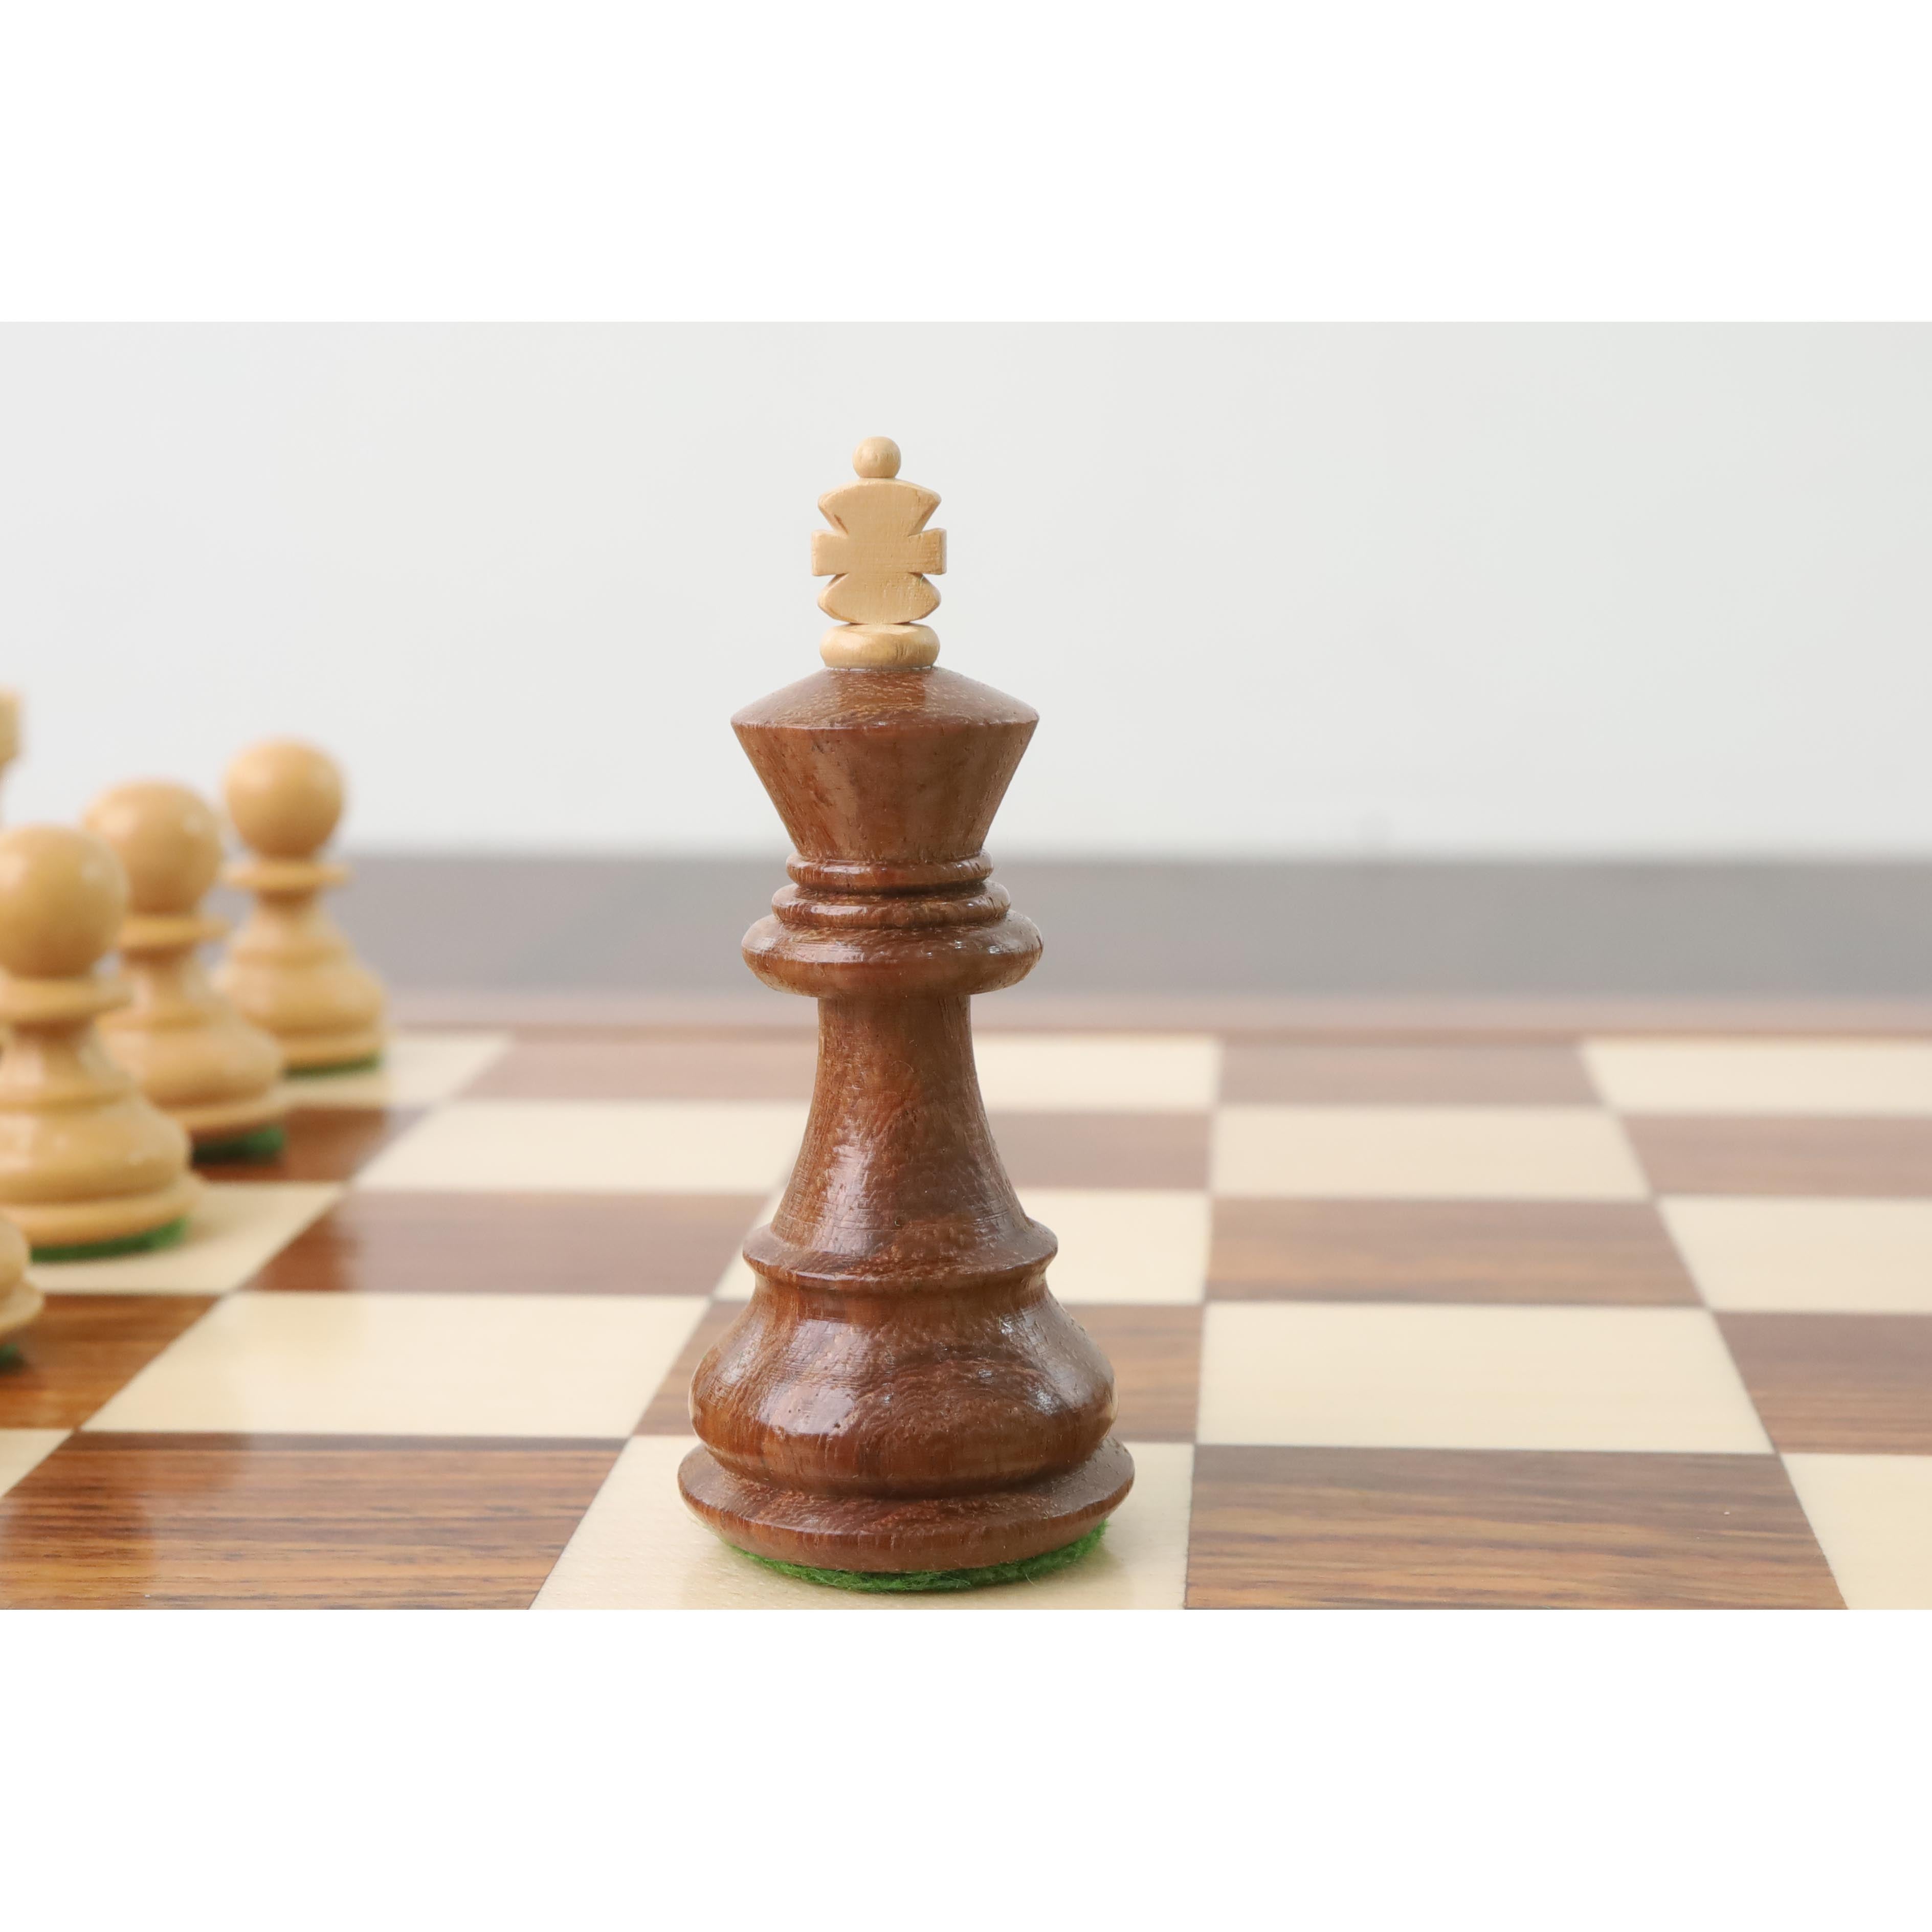 Full Chess.com Game with the Chessnut Air - 15% Off Discount Code! 